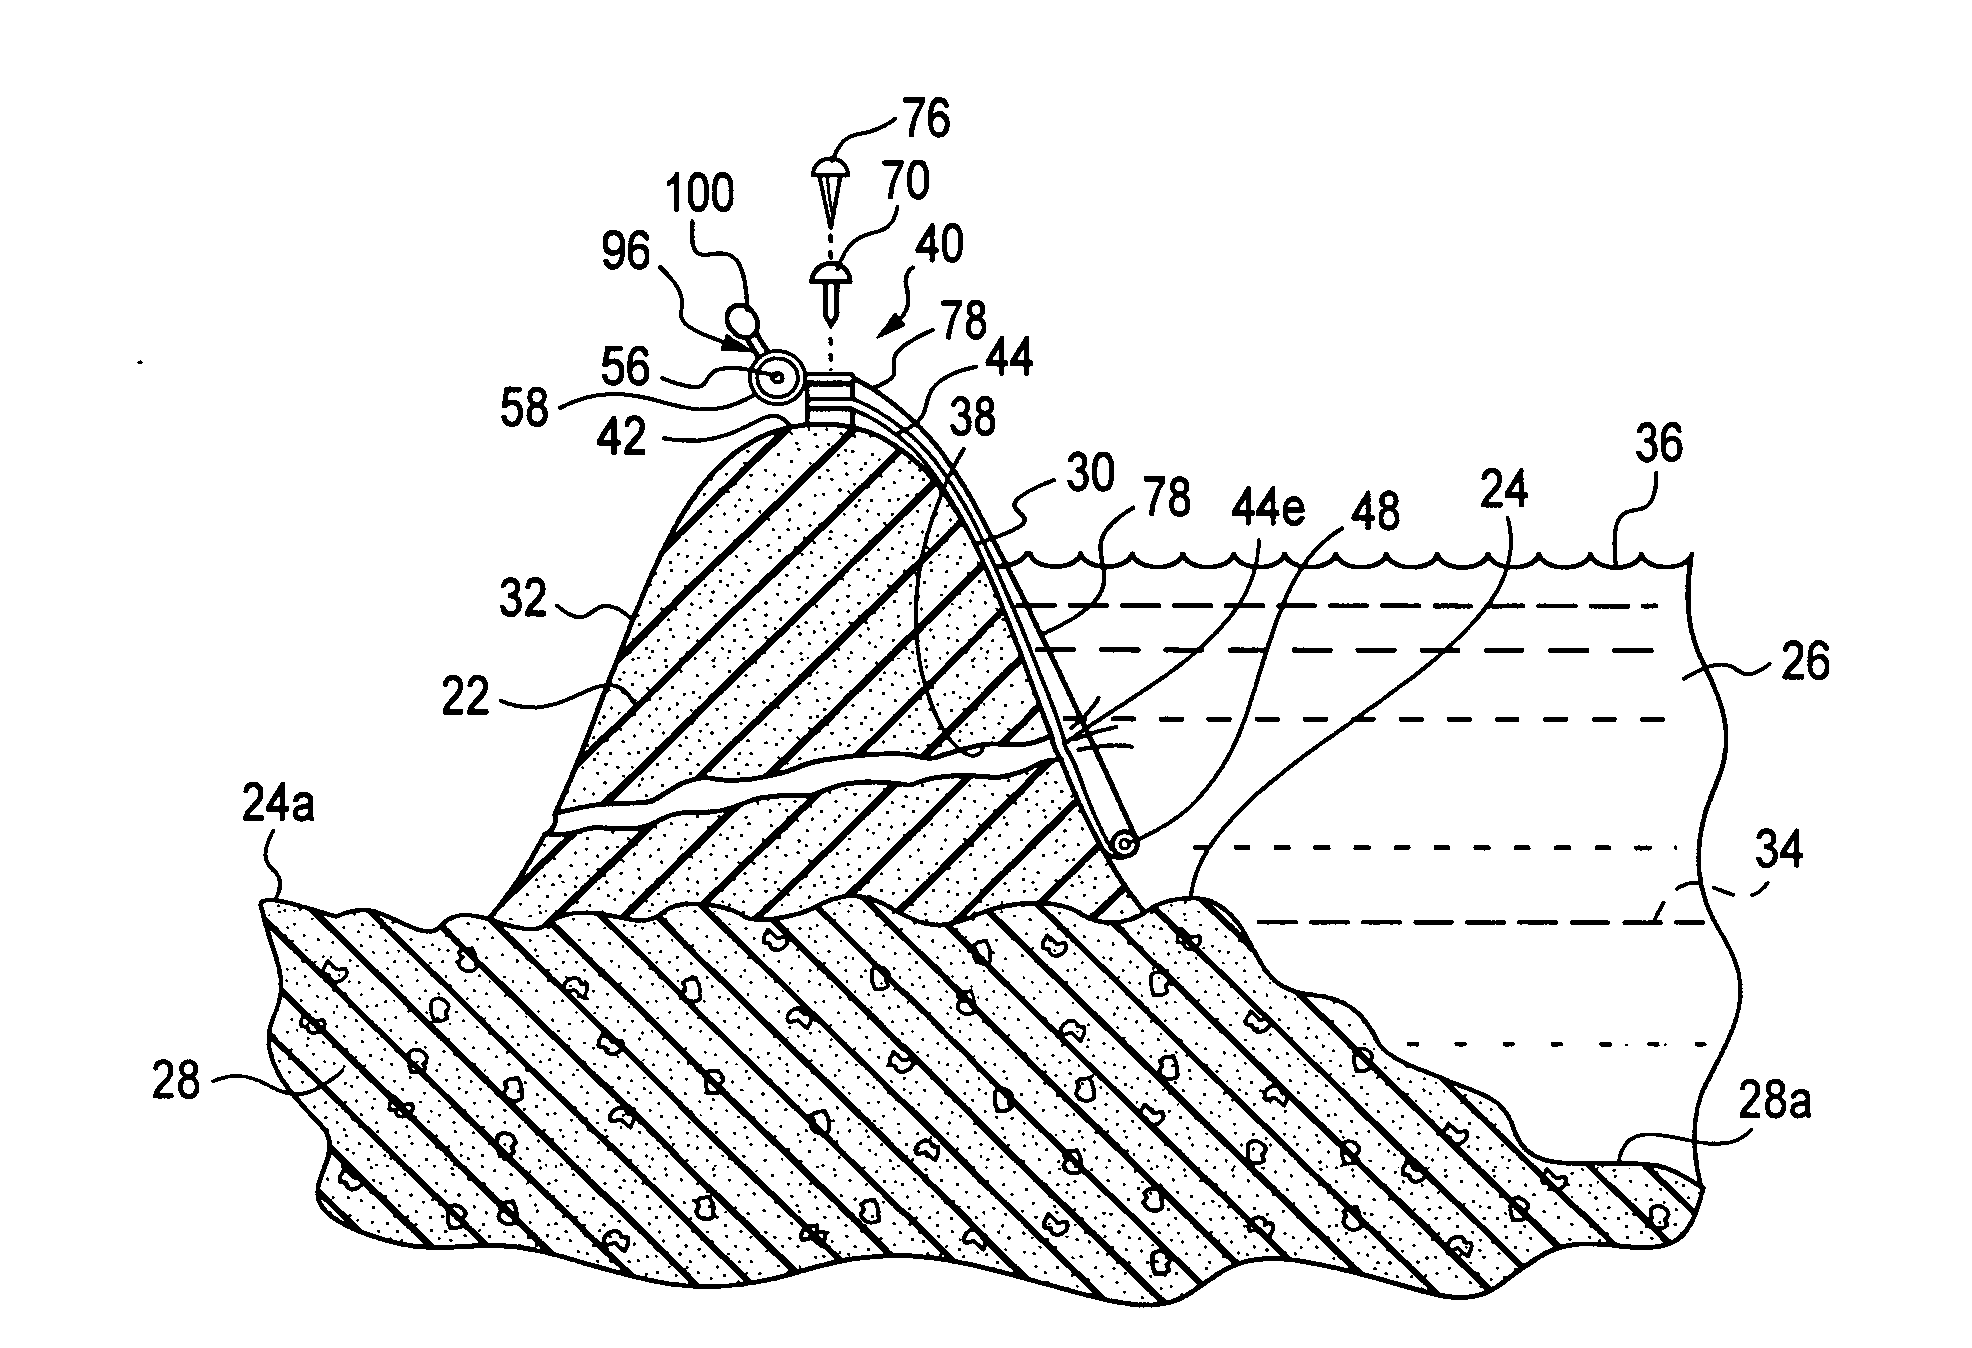 Apparatus for and methods of stabilizing a leaking dam or levee